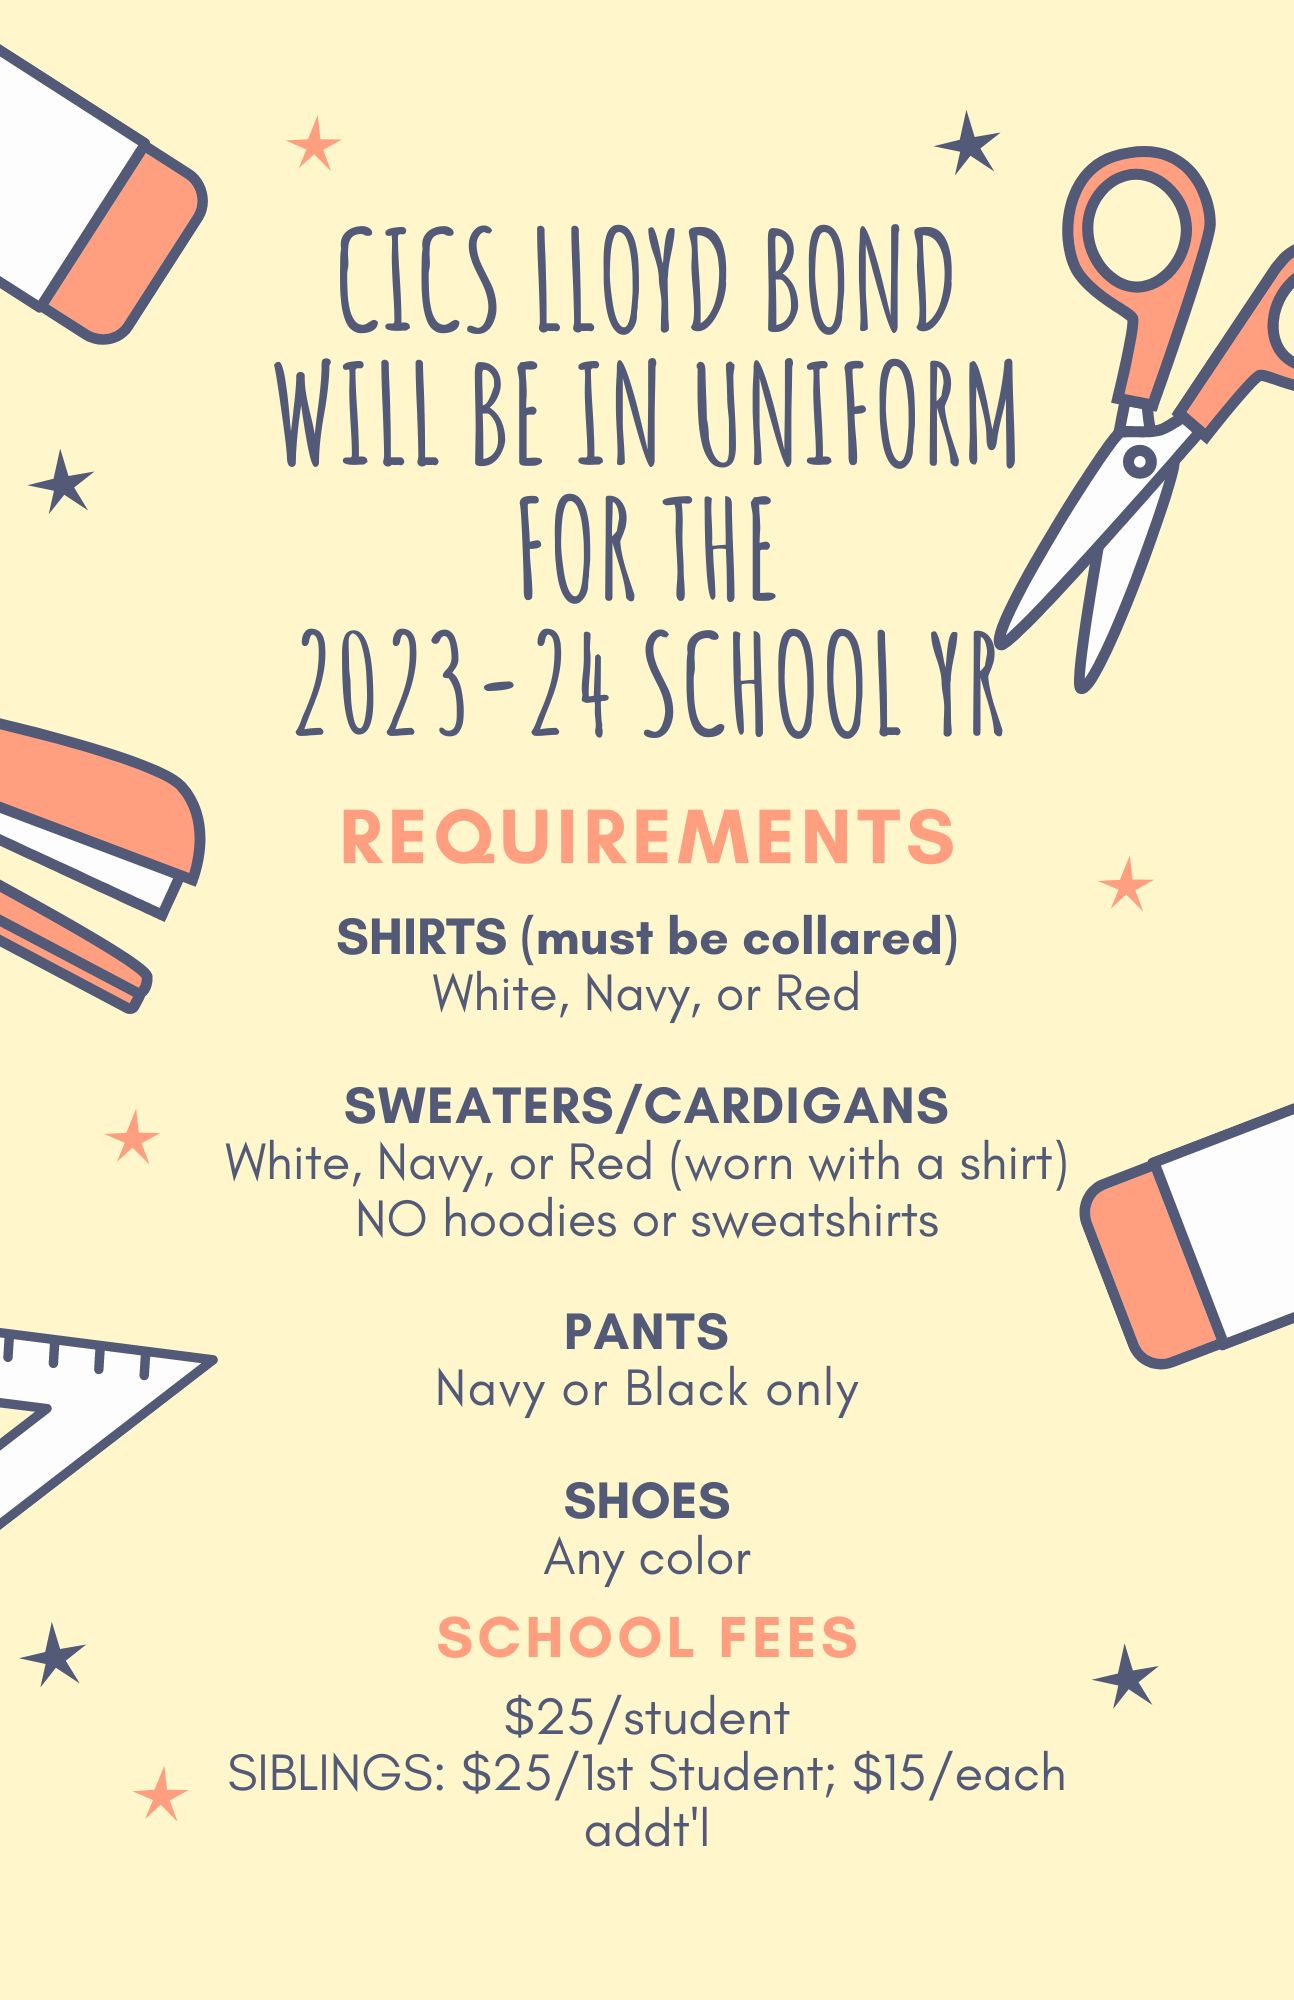 We will be in uniform!